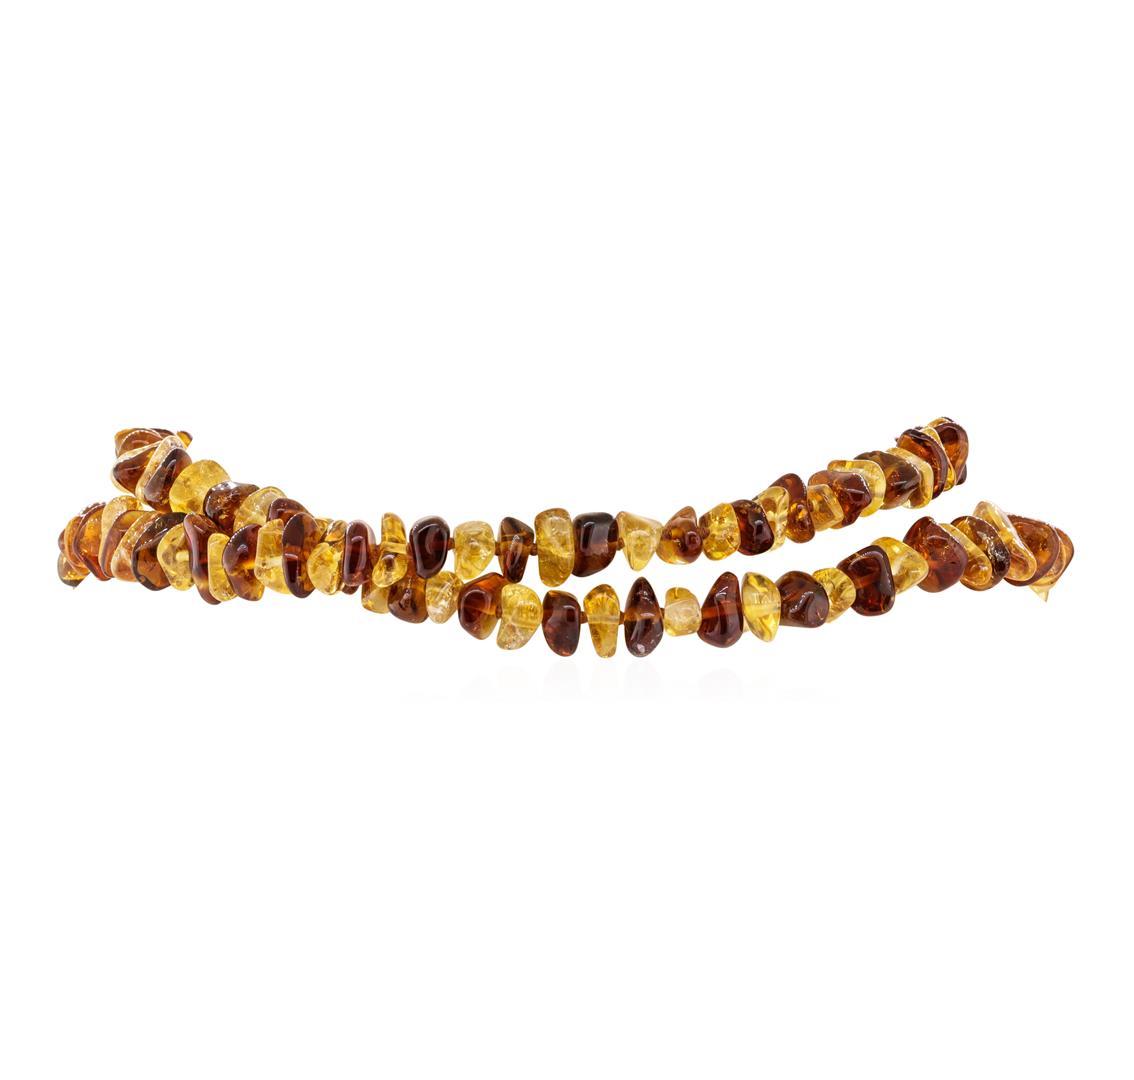 Thiry Inch Natural Quartz and Amber Necklace